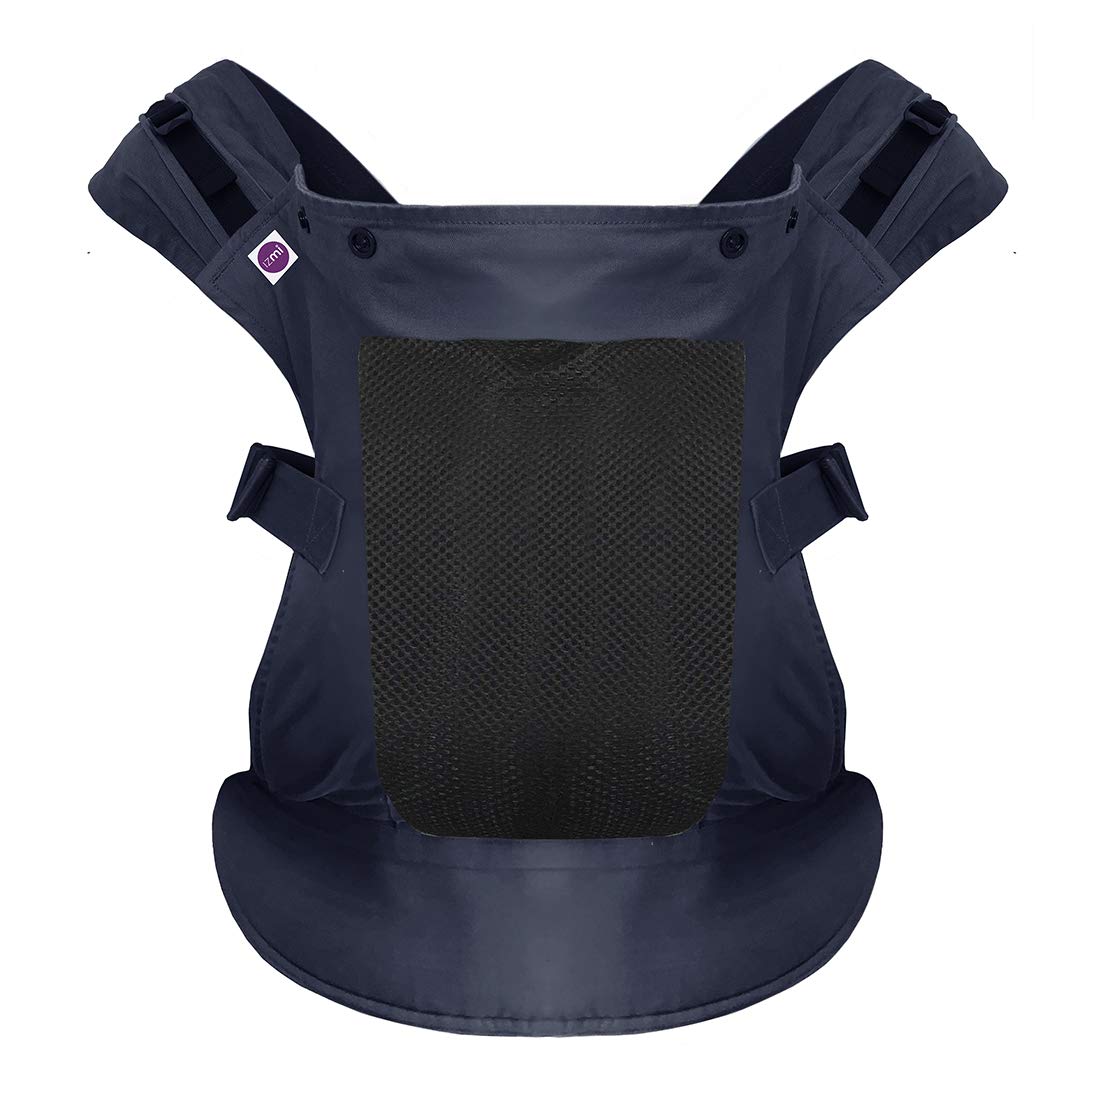 Izmi Kids Carrier Bag with Breathable Mesh Liner - Midnight Blue - Ideal for Babies 9 Months +